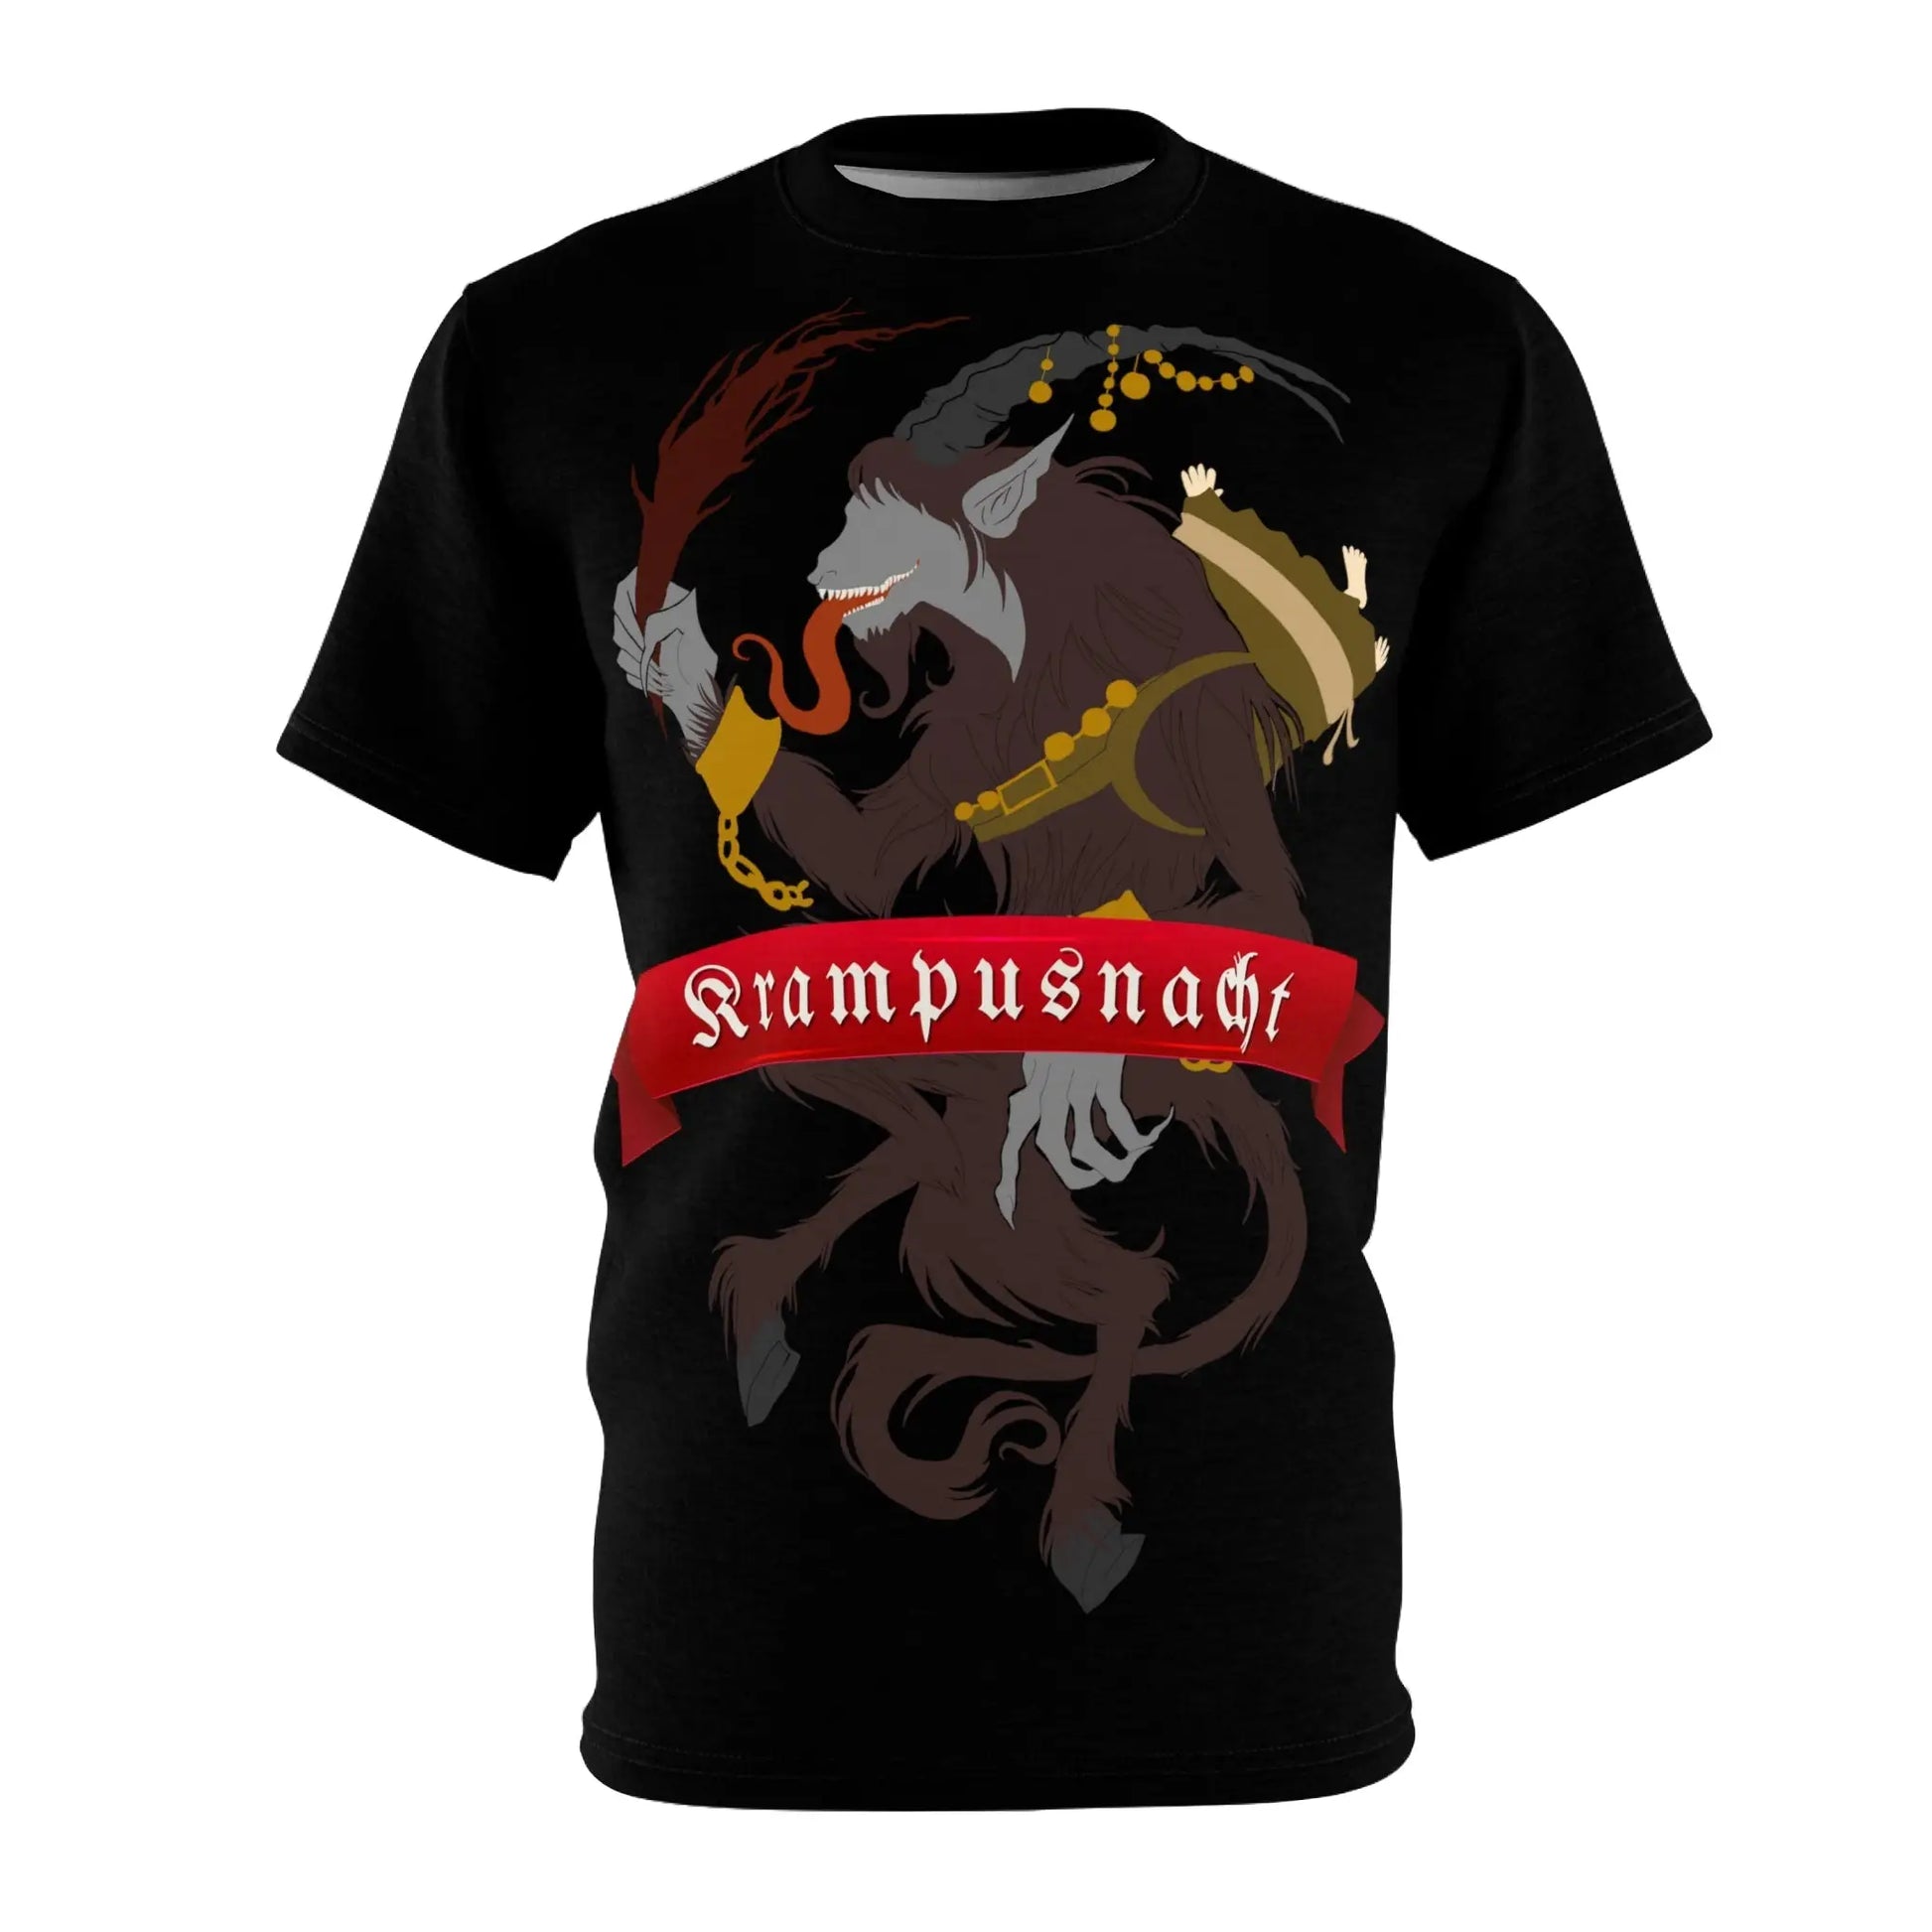 Krampusnacht All Over Print - Wicked Tees